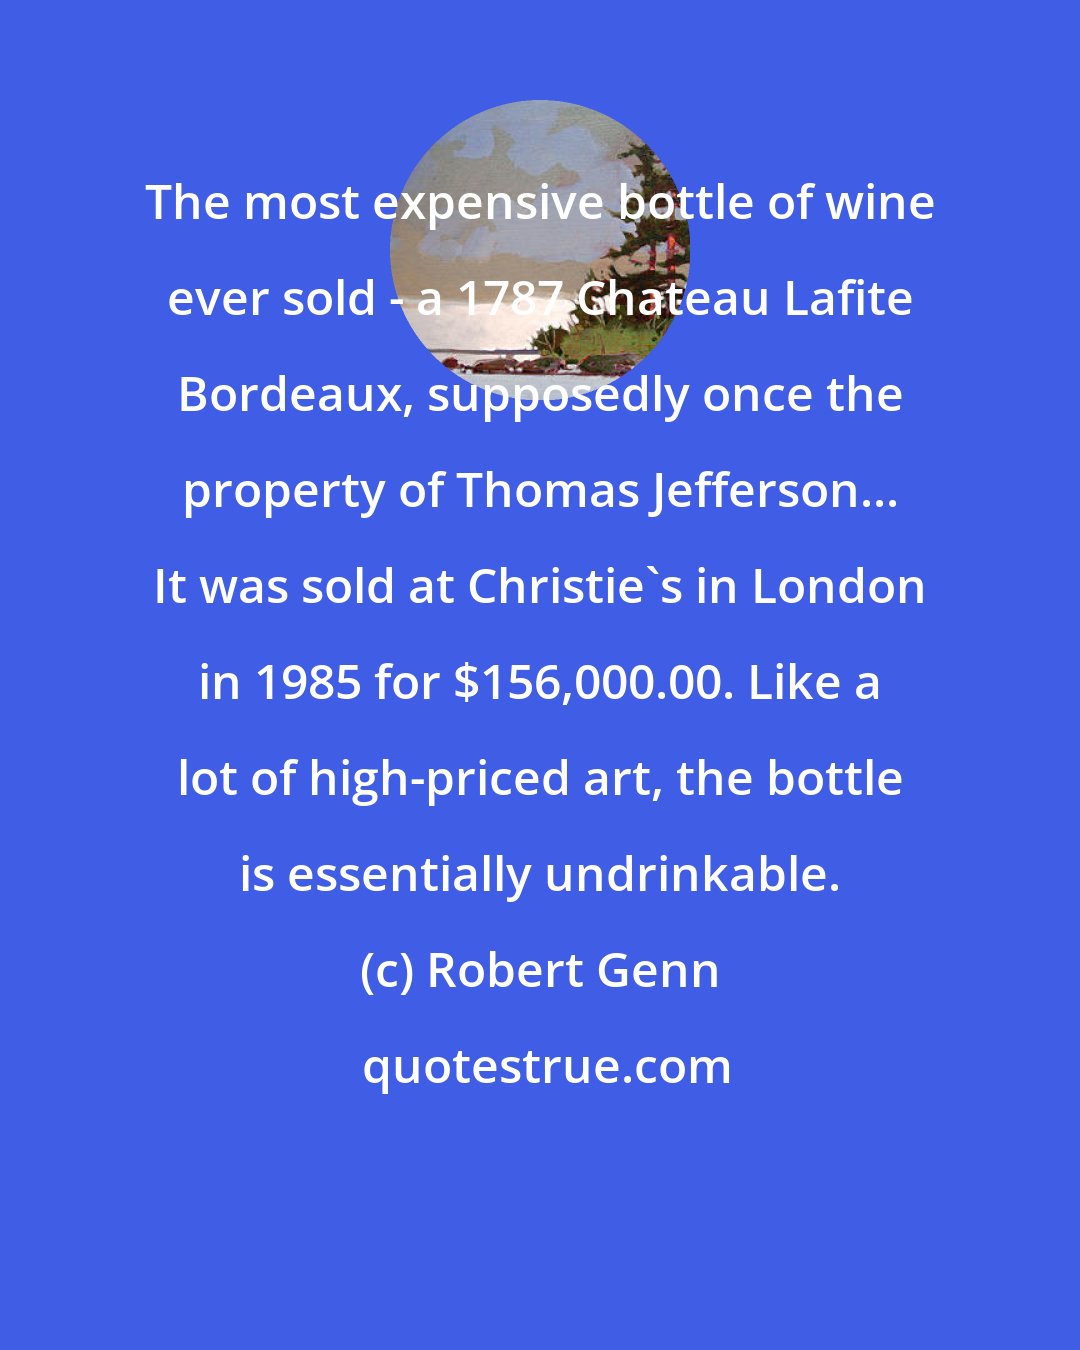 Robert Genn: The most expensive bottle of wine ever sold - a 1787 Chateau Lafite Bordeaux, supposedly once the property of Thomas Jefferson... It was sold at Christie's in London in 1985 for $156,000.00. Like a lot of high-priced art, the bottle is essentially undrinkable.